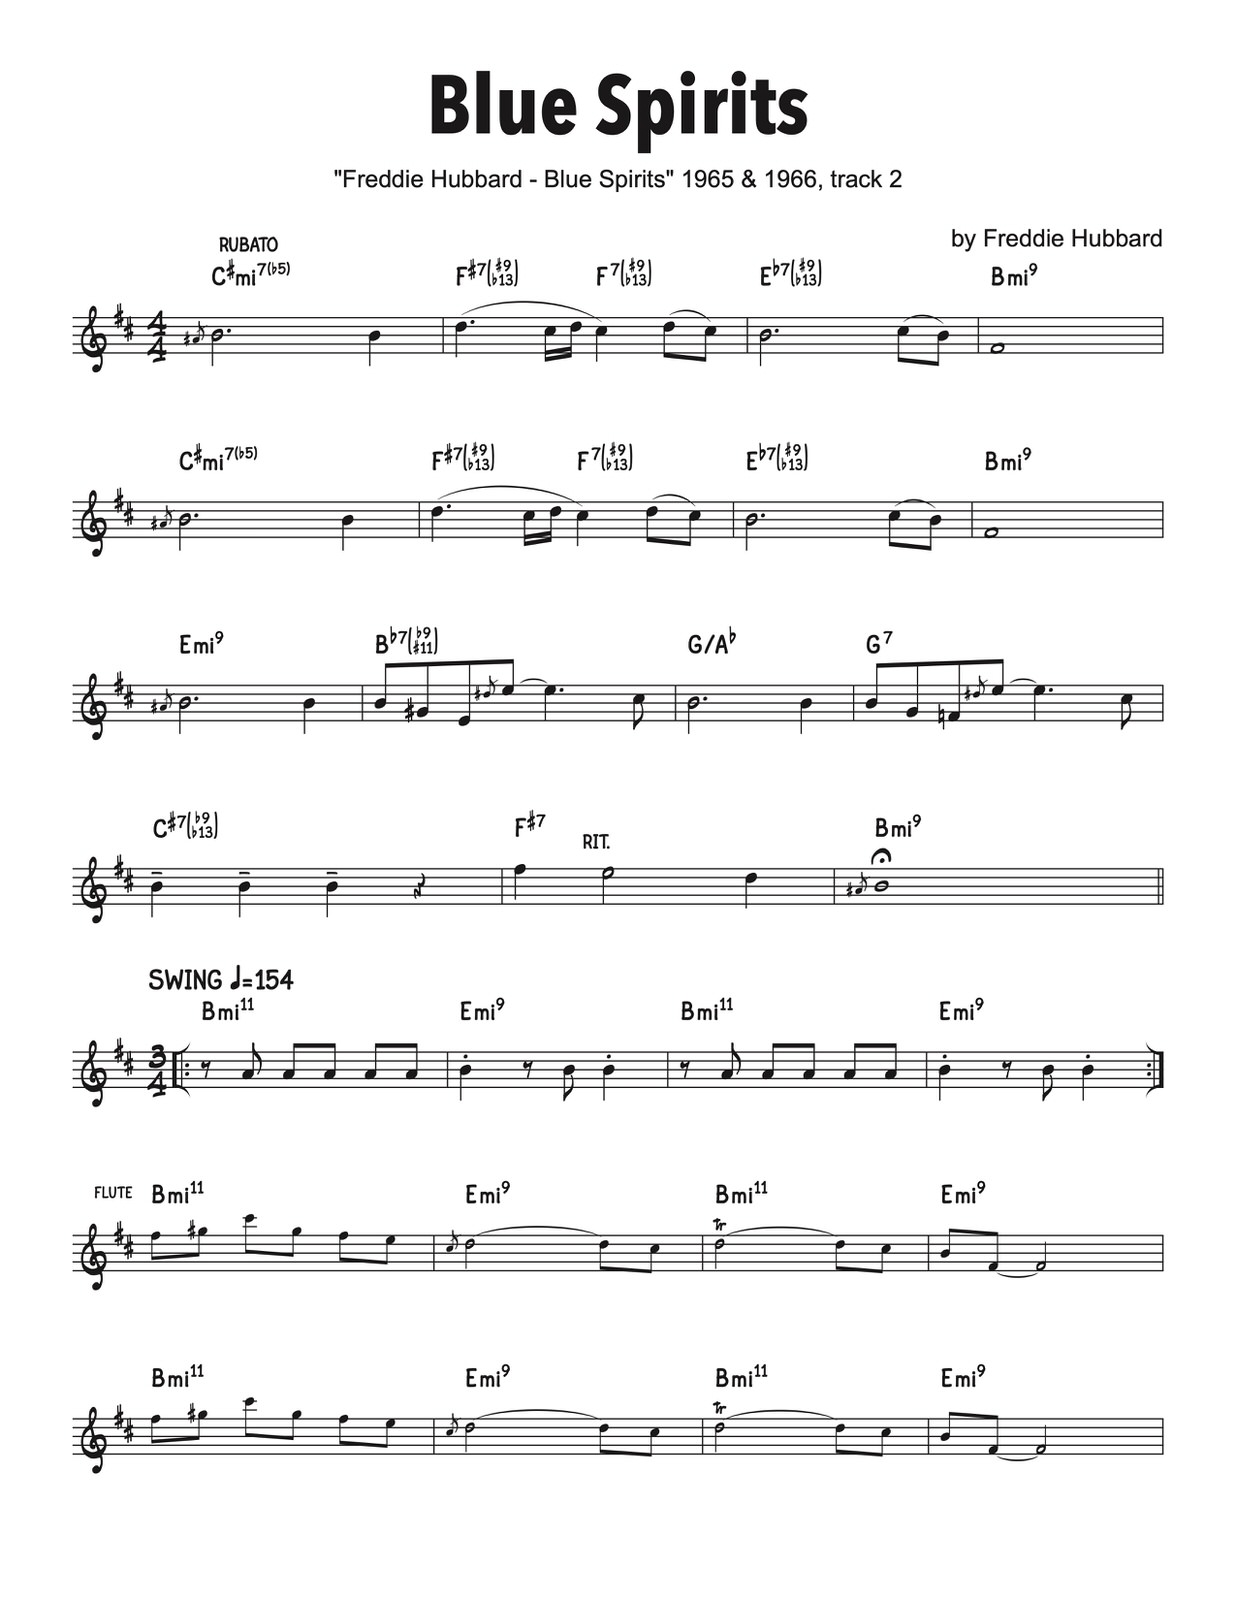 Hubbard's Breaking Point! Complete Album Transcription by